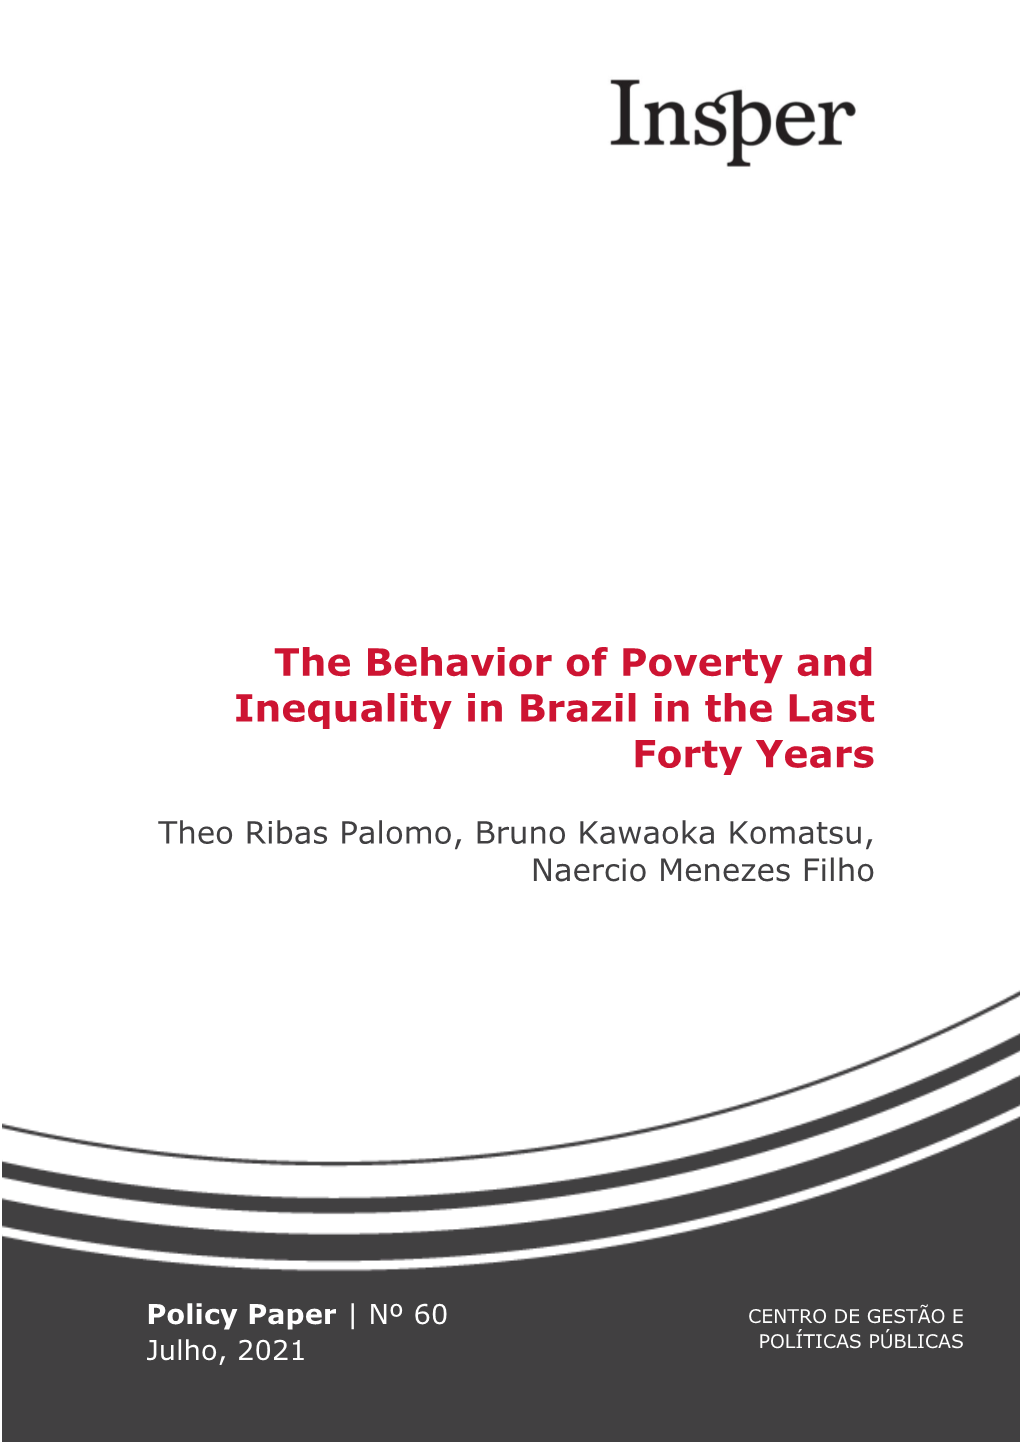 The Behavior of Poverty and Inequality in Brazil in the Last Forty Years